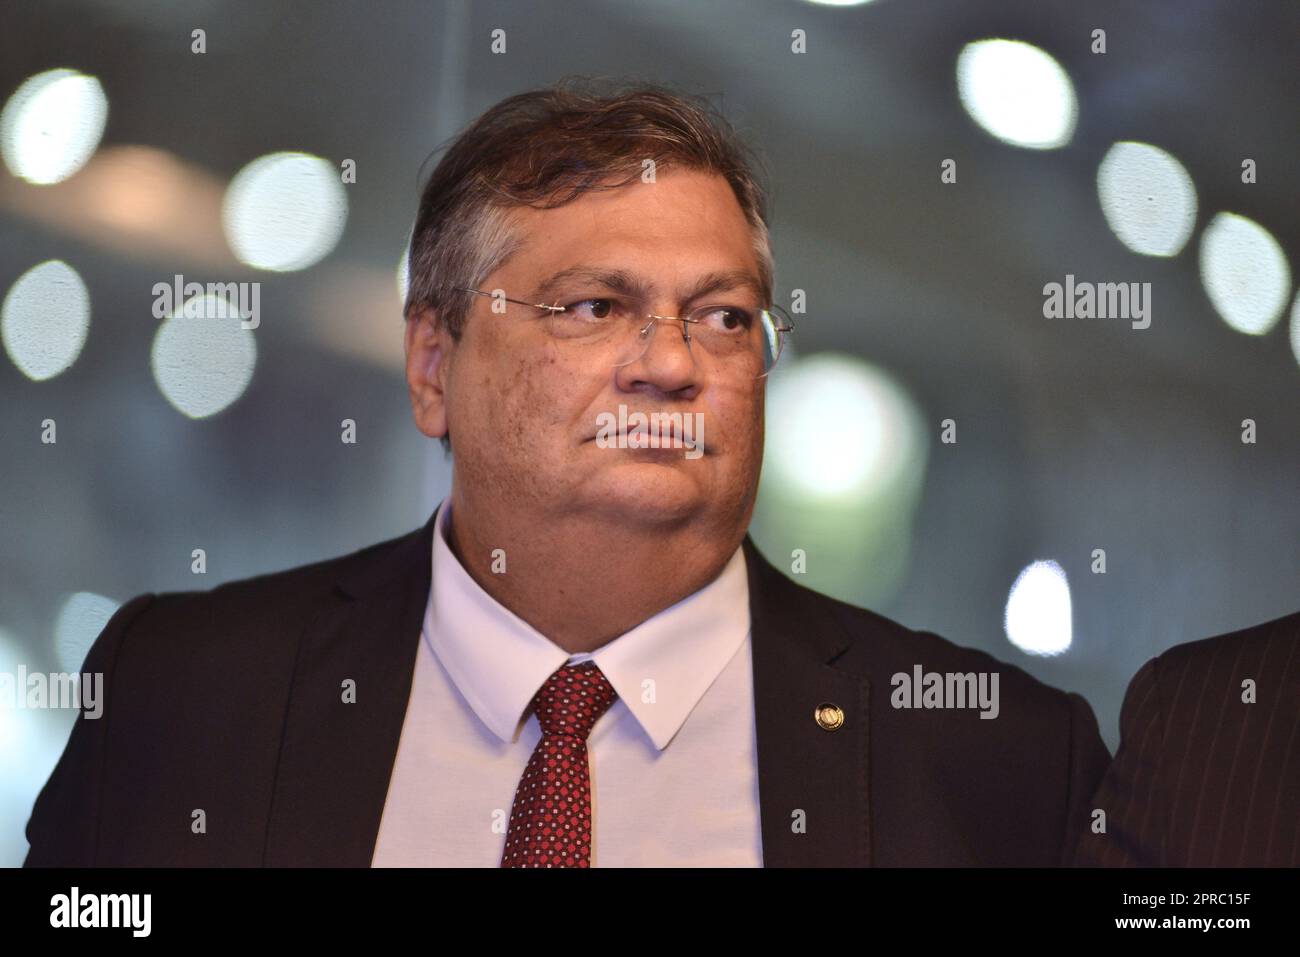 Minister of Justice of Brazil, Flavio Dino, during a press conference at LAAD DEFENCE & SECURITY 2023, in Rio de Janeiro/Brazil. Stock Photo